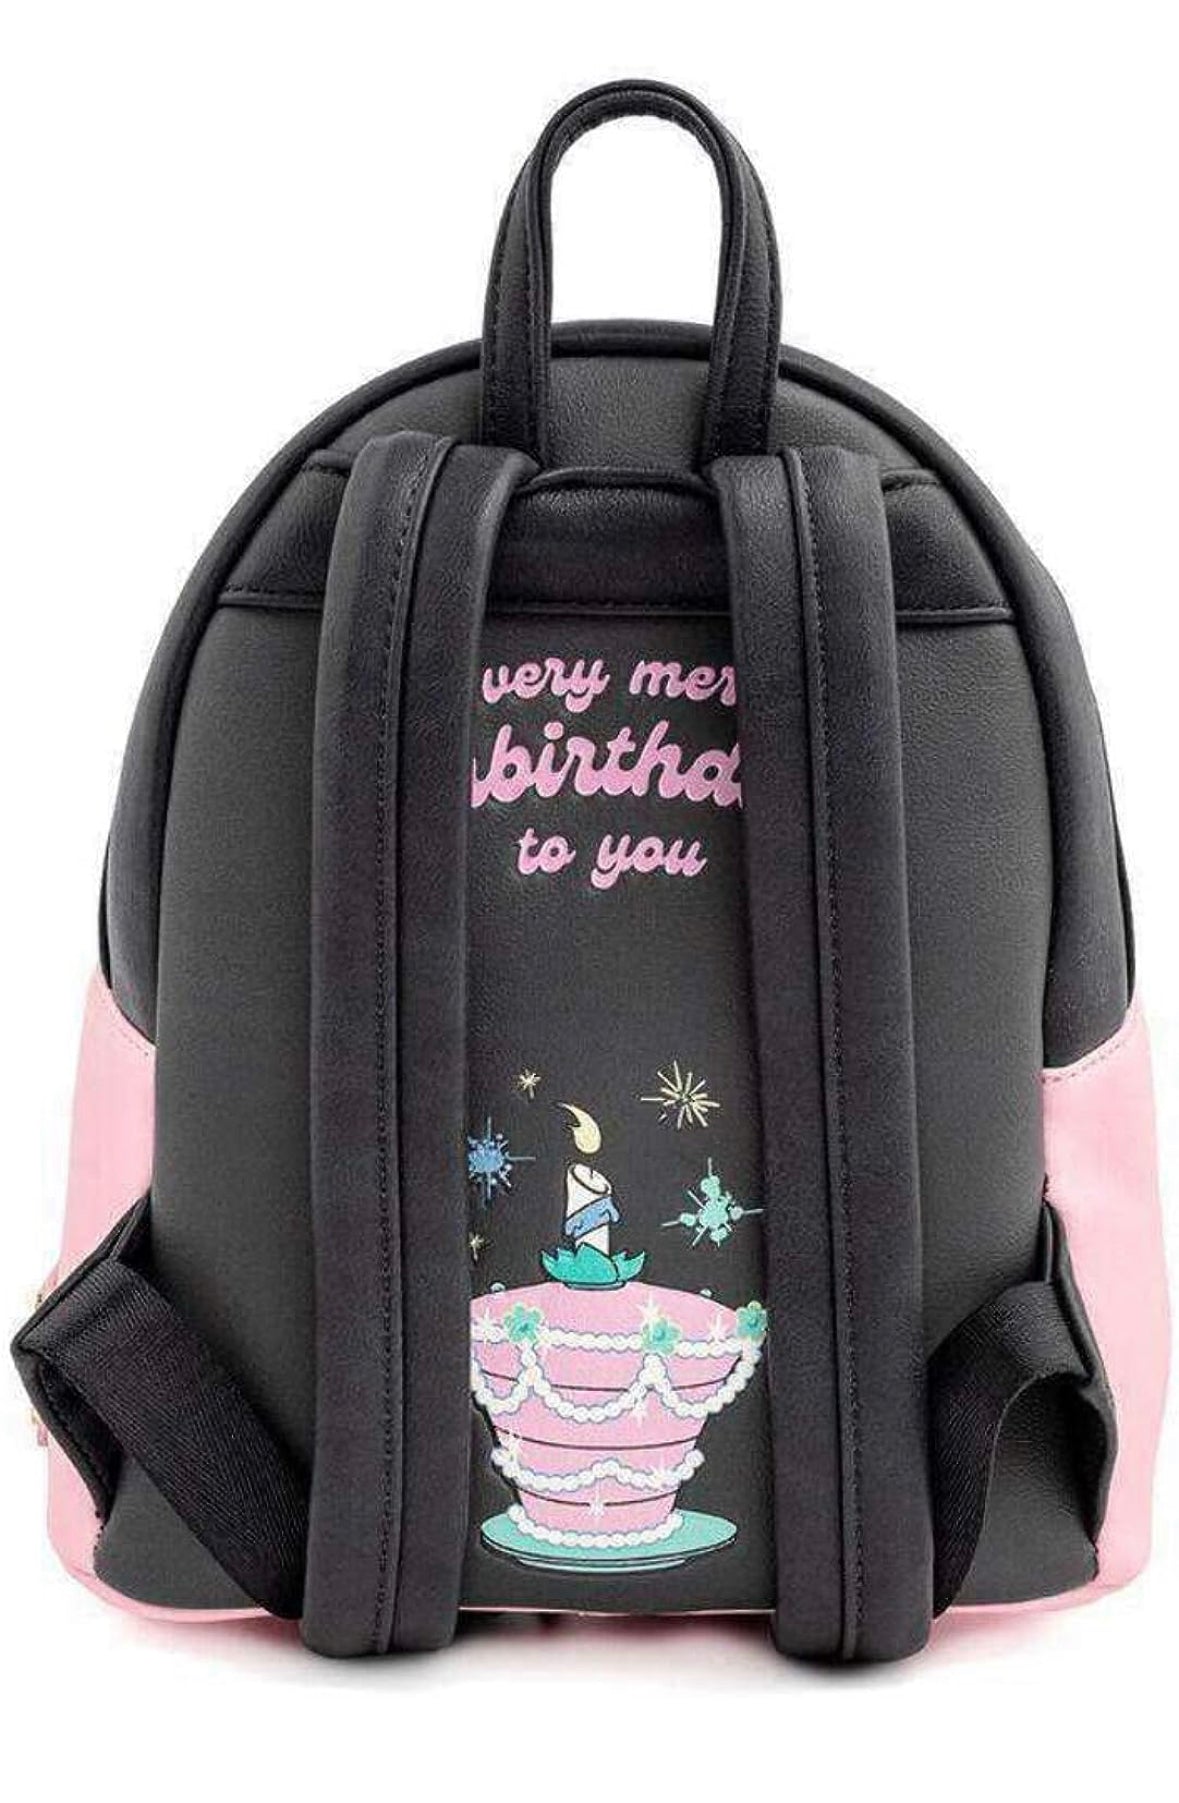 Loungefly Disney Alice in Wonderland A Very Merry Birthday To You Womens Double Strap Shoulder Bag Purse